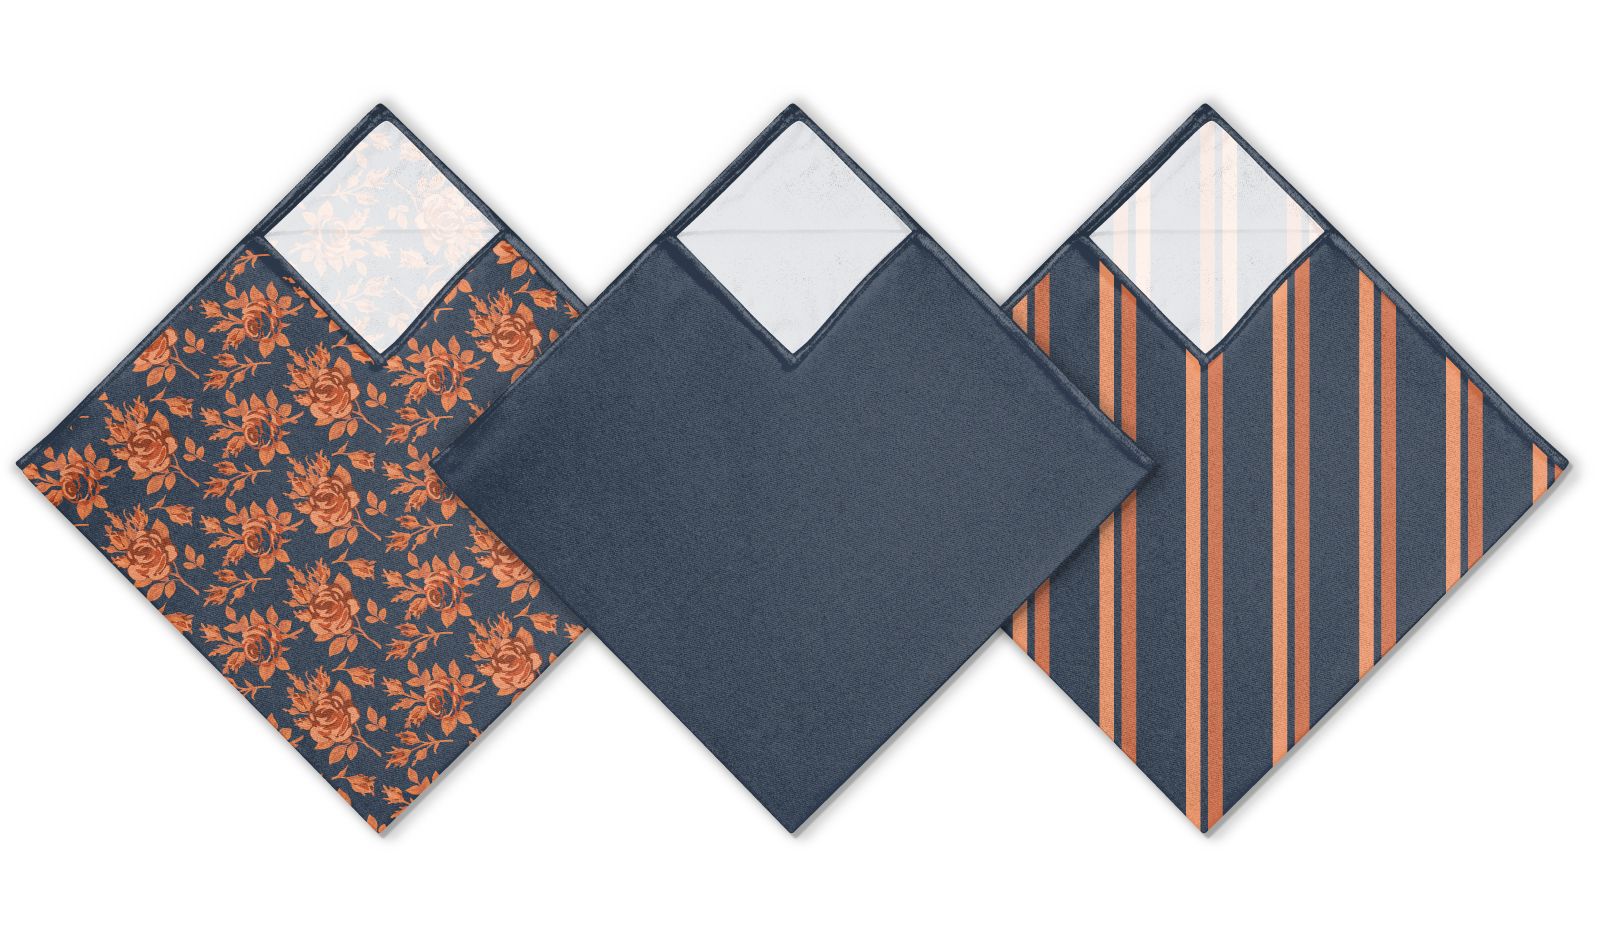 Wedding colored pocket squares with floral, solid, and striped pocket square designs.